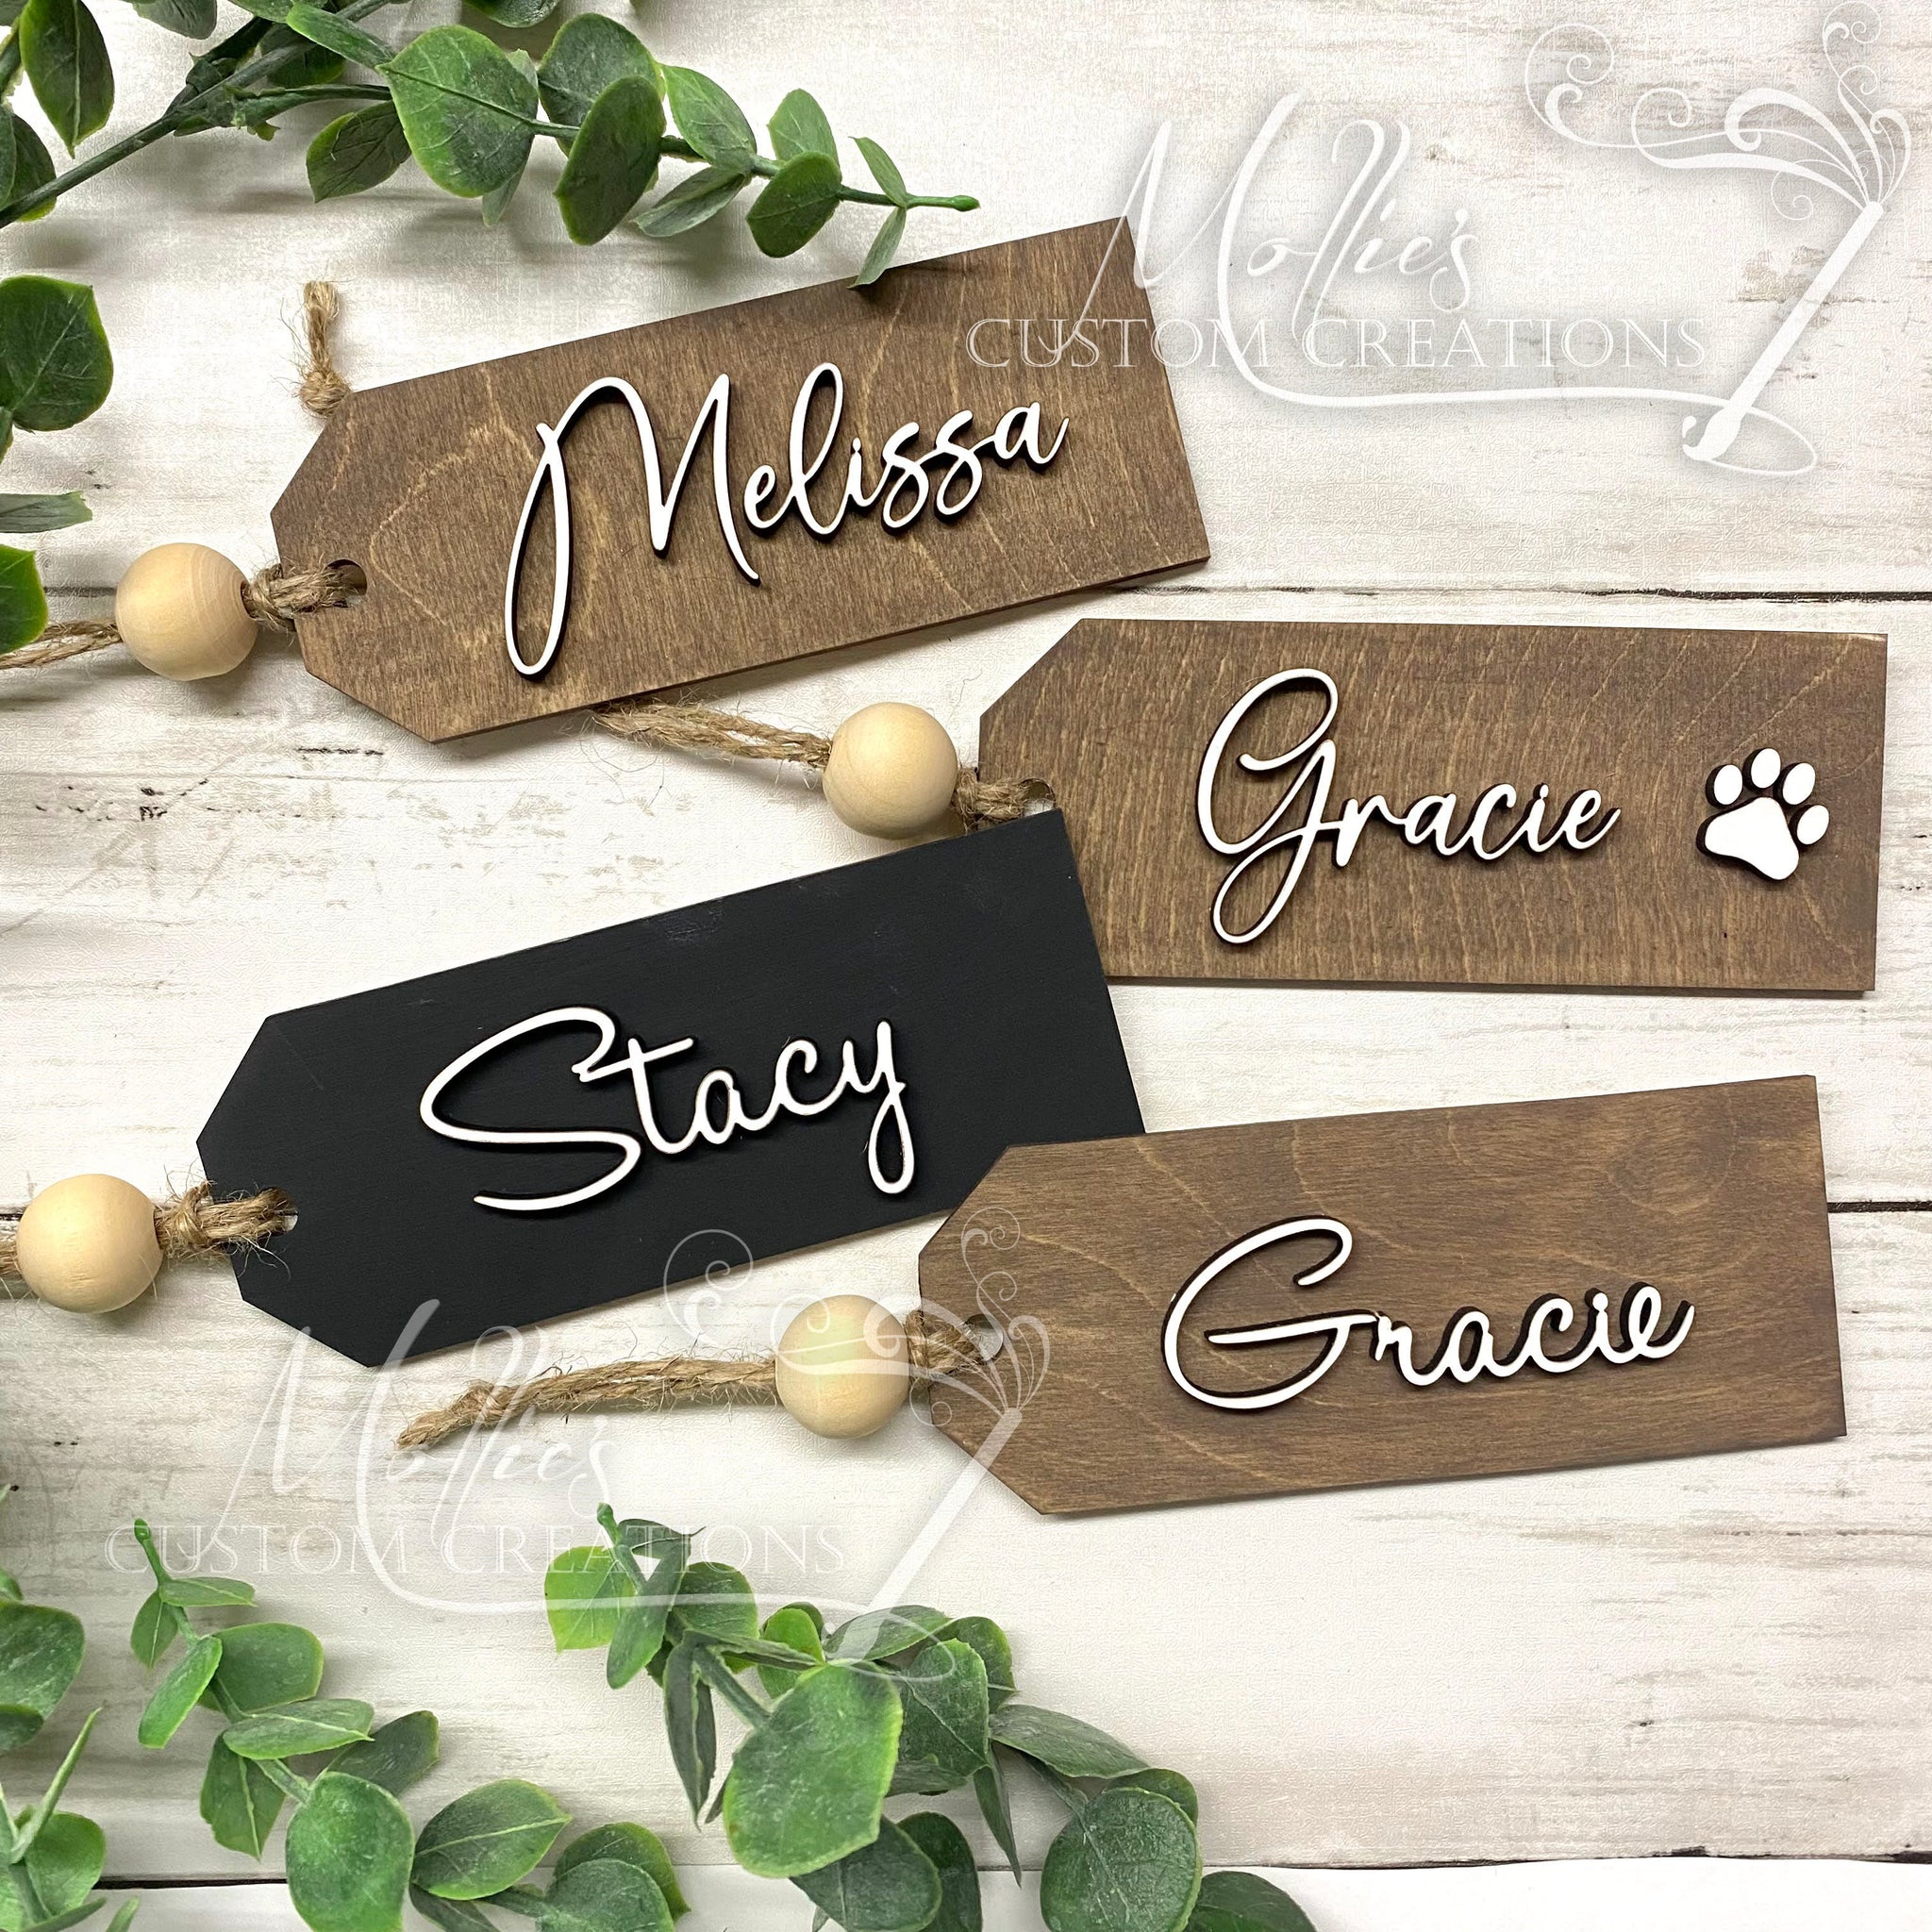 Personalised Christmas Stocking Name Tags, Personalized Gift Tags